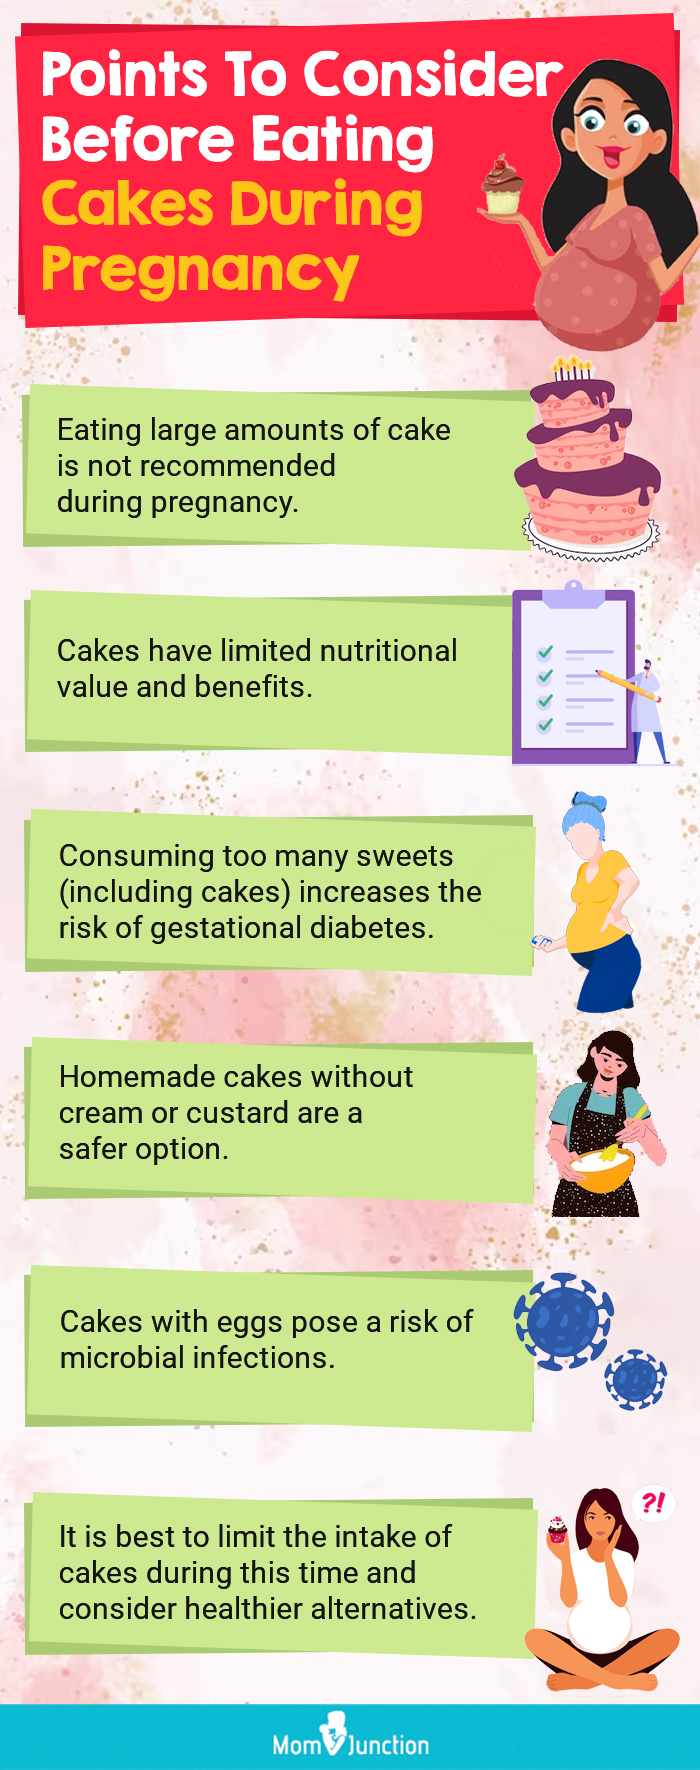 points to consider before eating cakes during pregnancy (infographic)